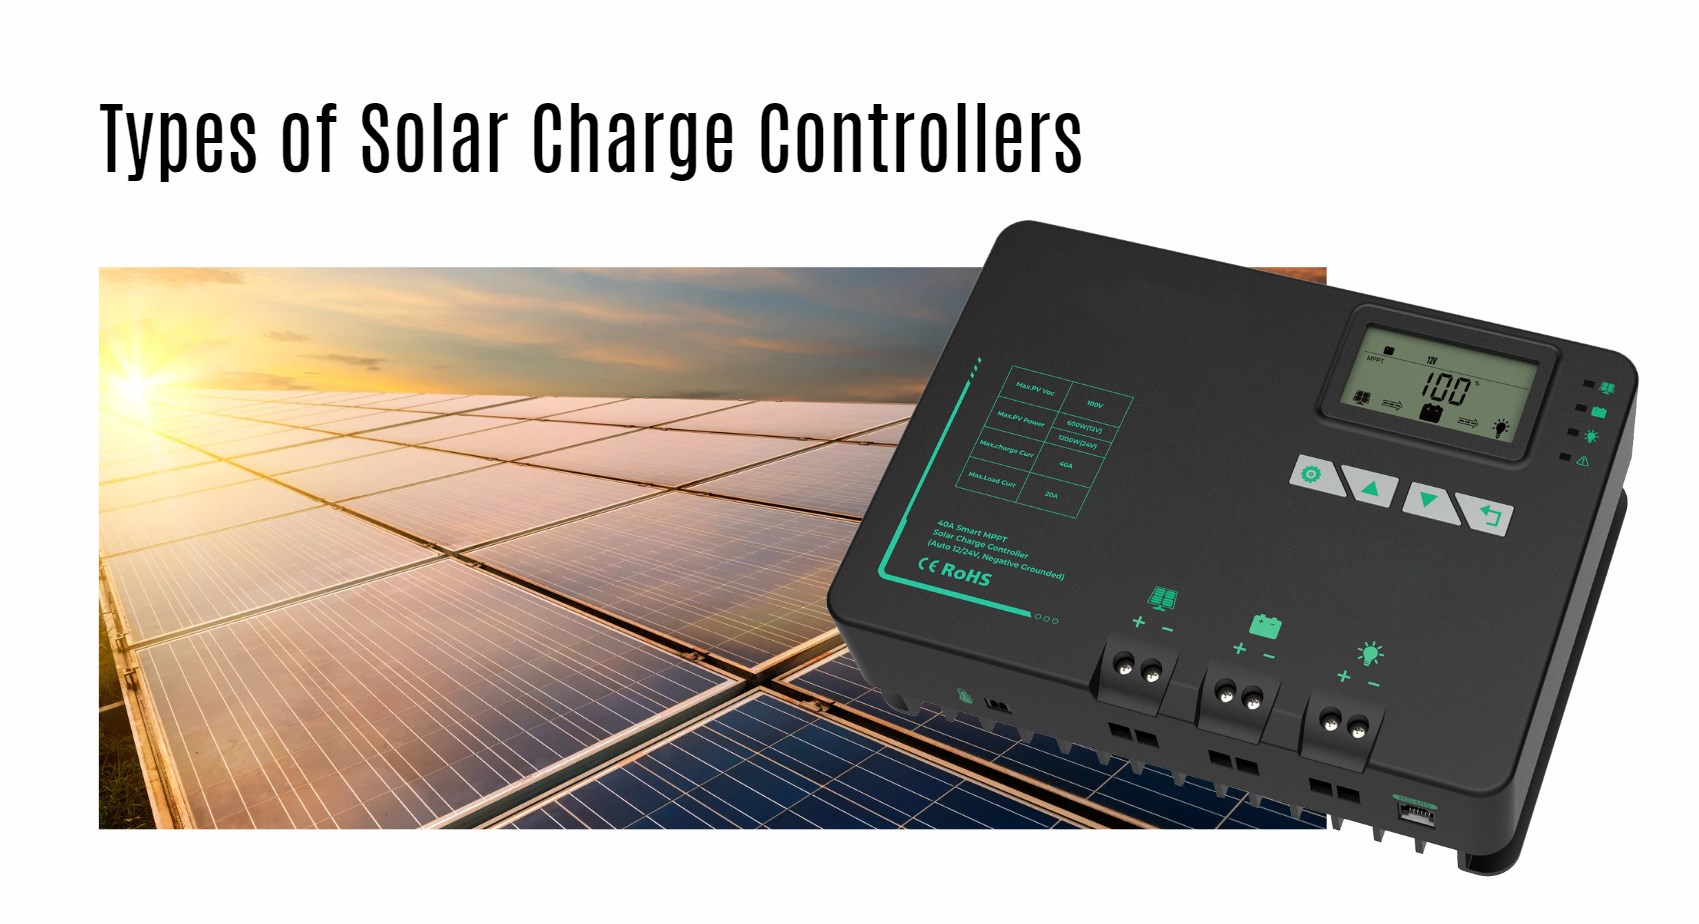 Types of Solar Charge Controllers. Why Choosing The Right Solar Charge Controller Is Important?